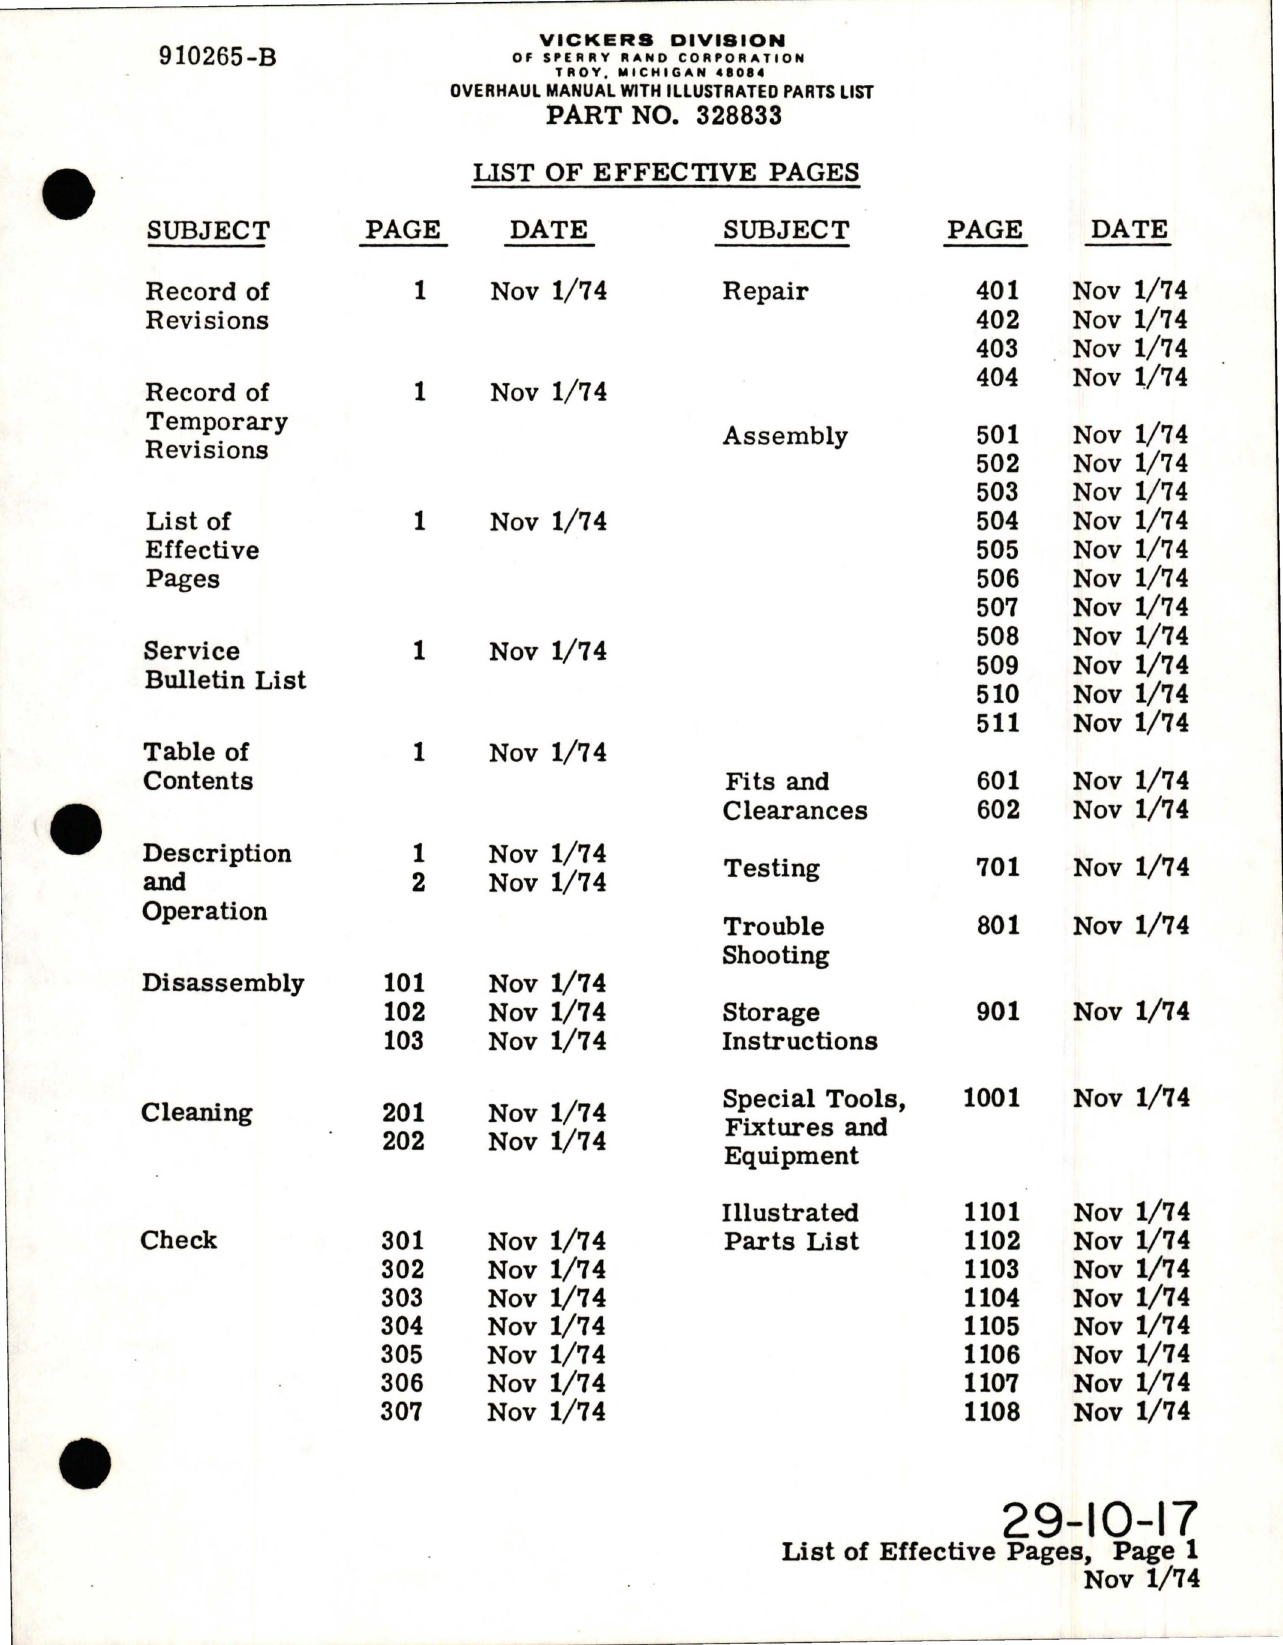 Sample page 9 from AirCorps Library document: Overhaul with Illustrated Parts List for Electric Motor - Part 328833